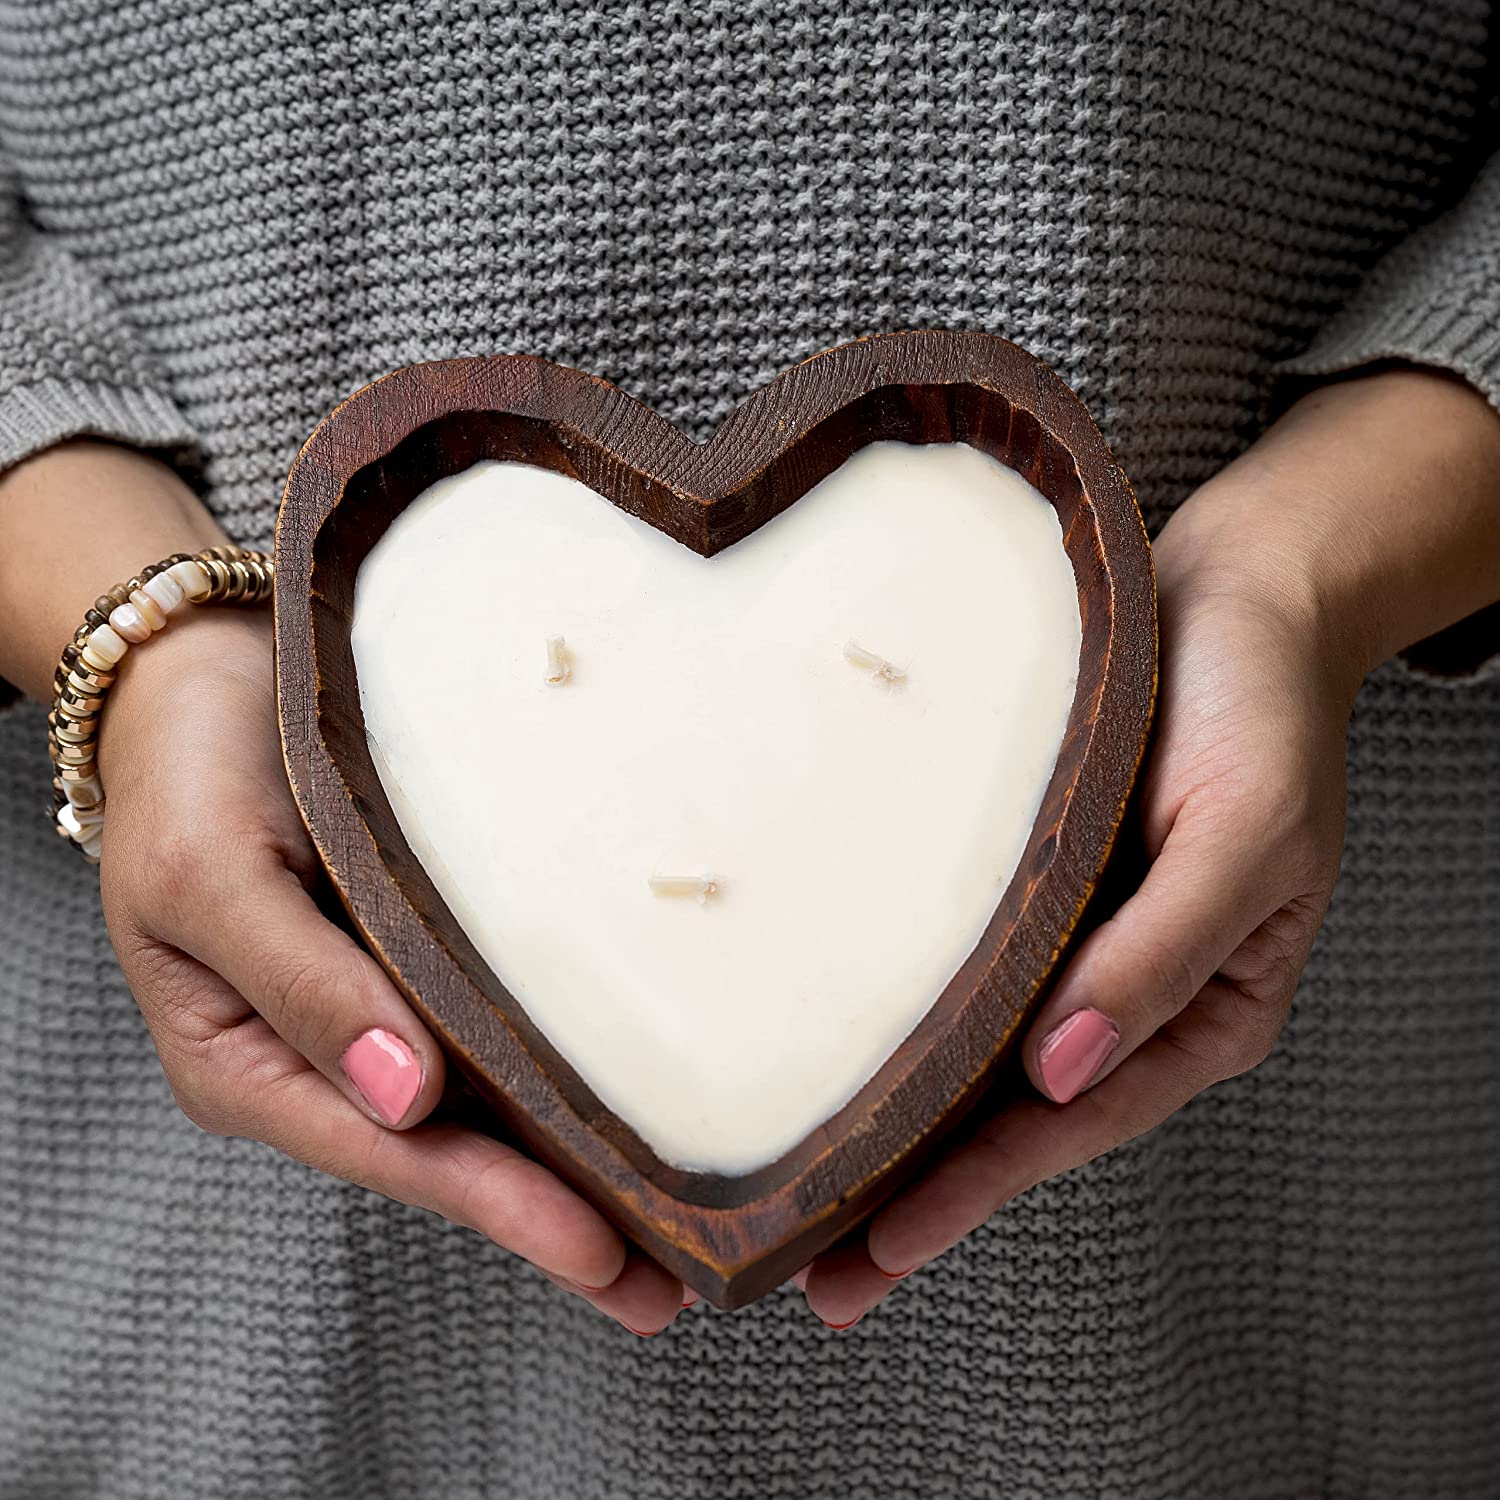 MWC-06 Heart Dough Bowl Candle | Heart Candles: Three Wick Candle in Heart Shaped Candle | White Hearts Dough Bowl Candles